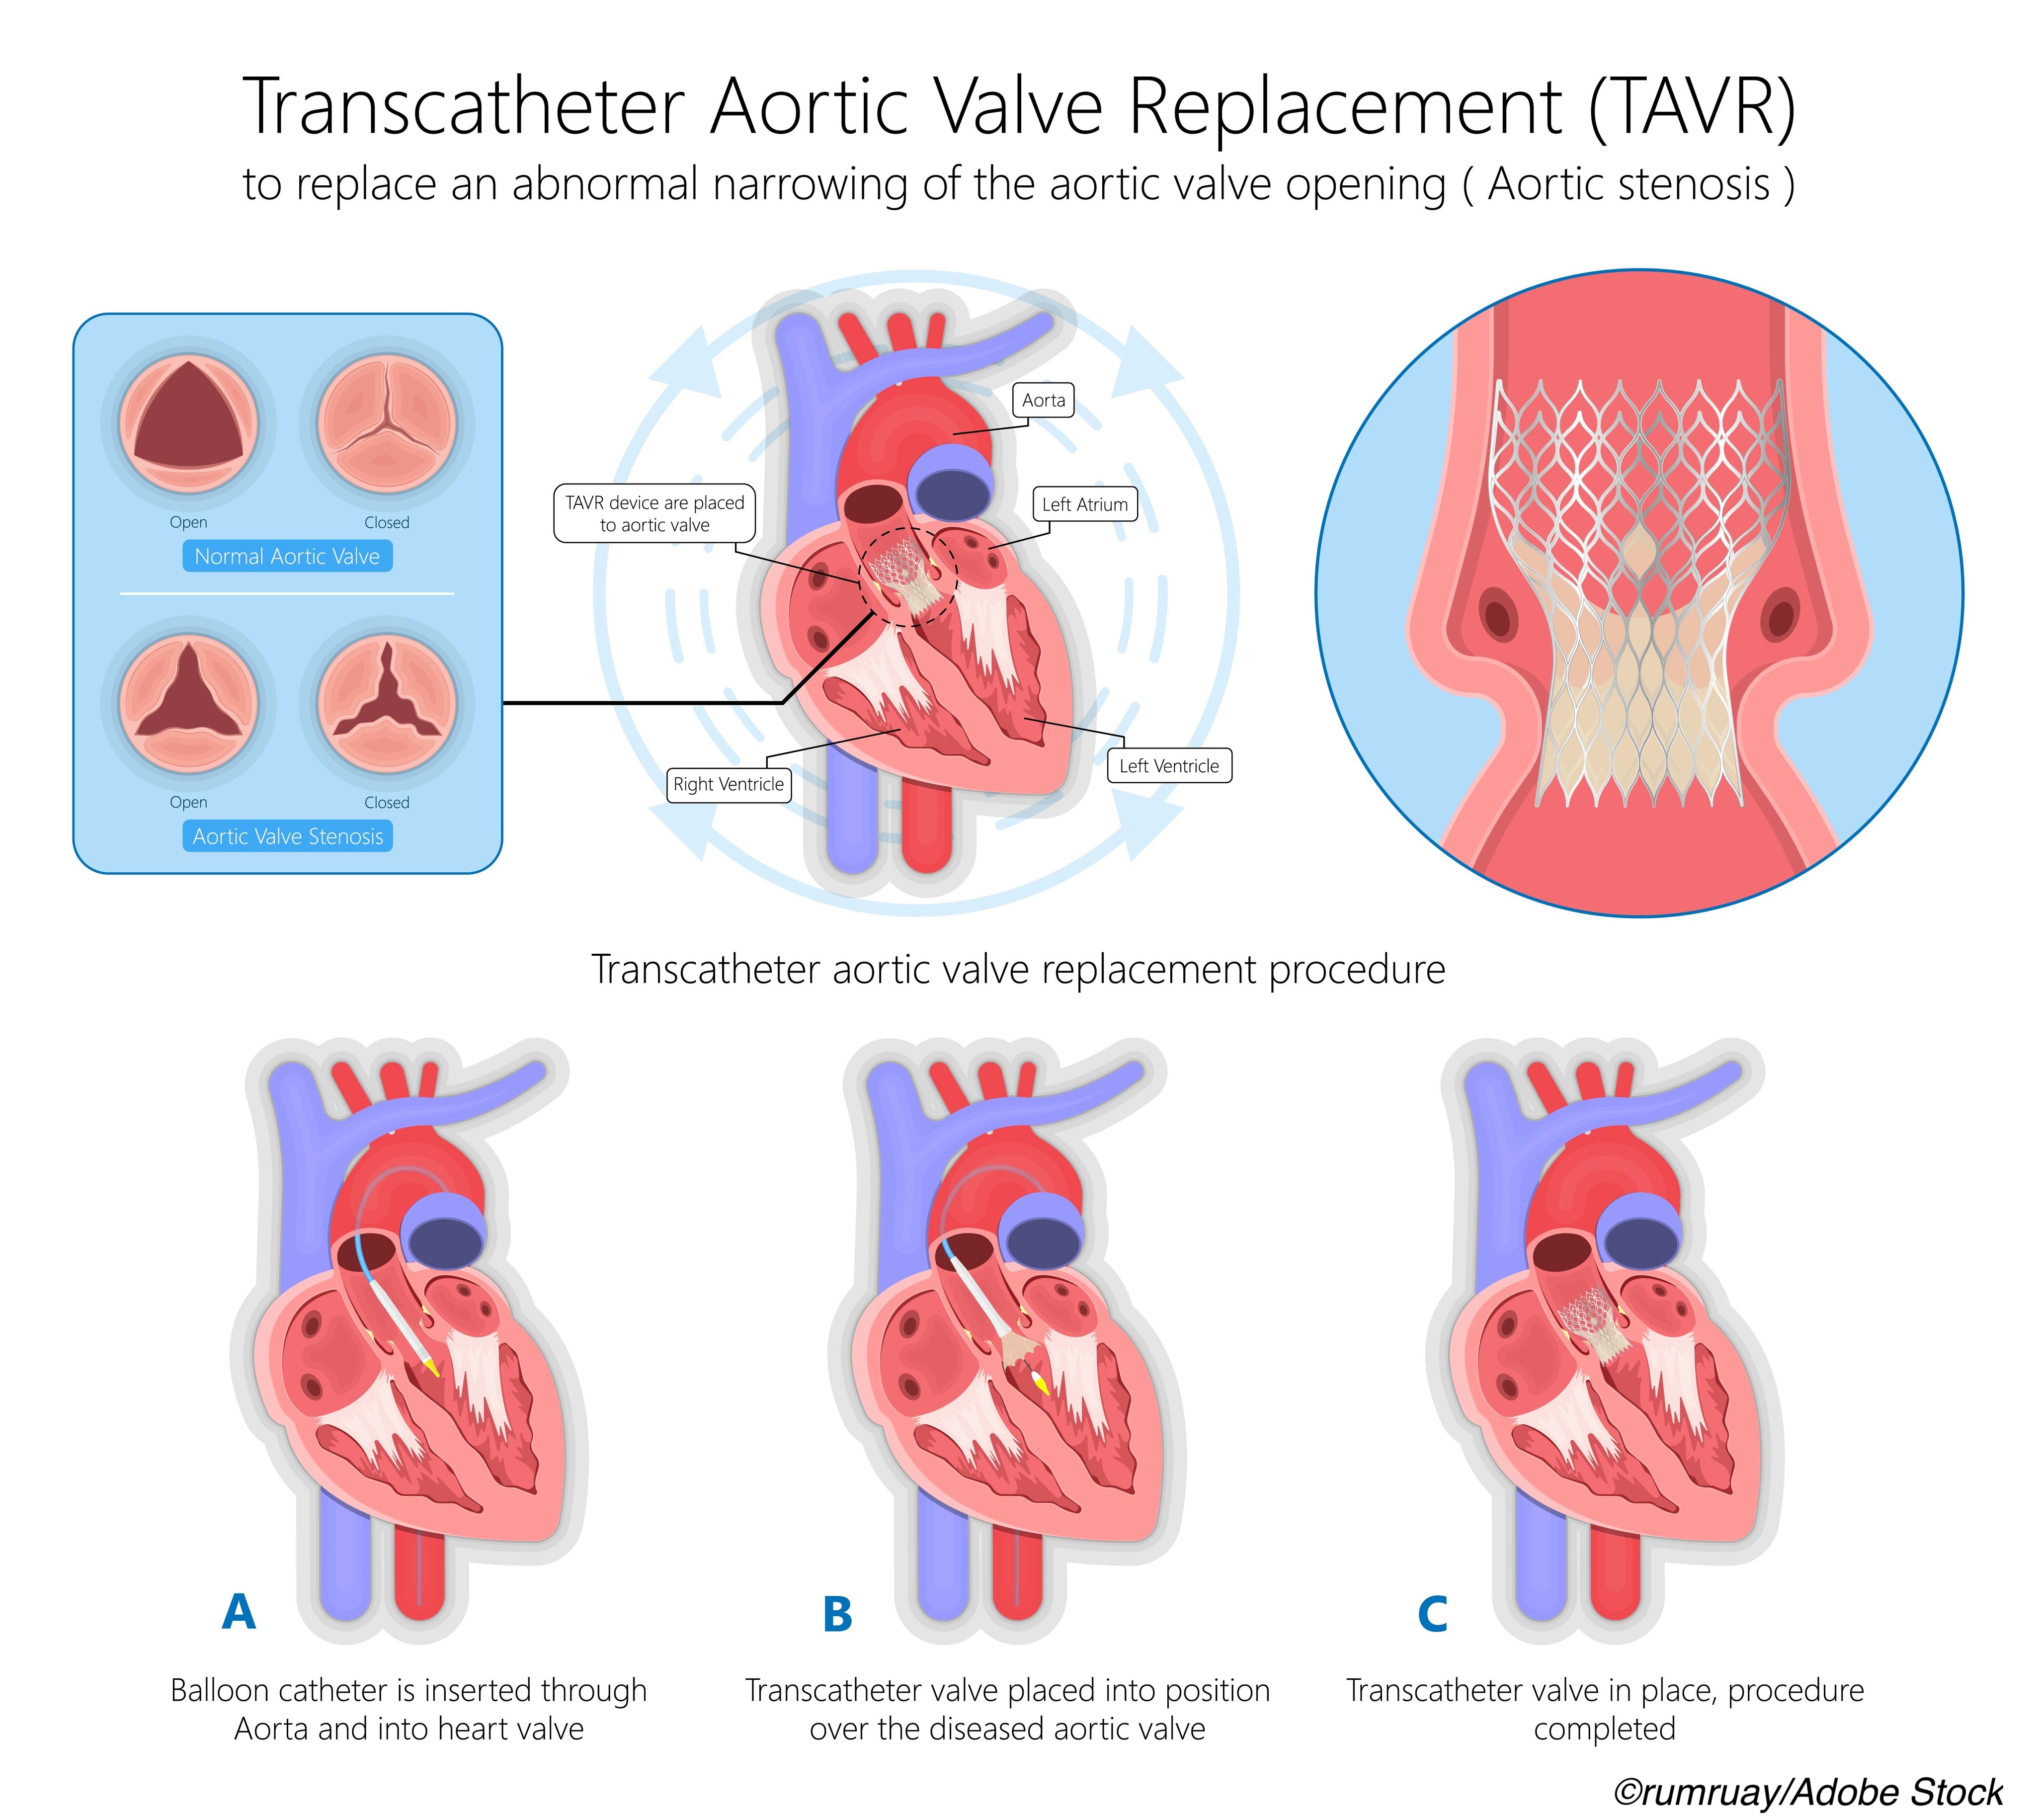 Are Race-Based Disparities Responsible for Lower TAVR Rates?